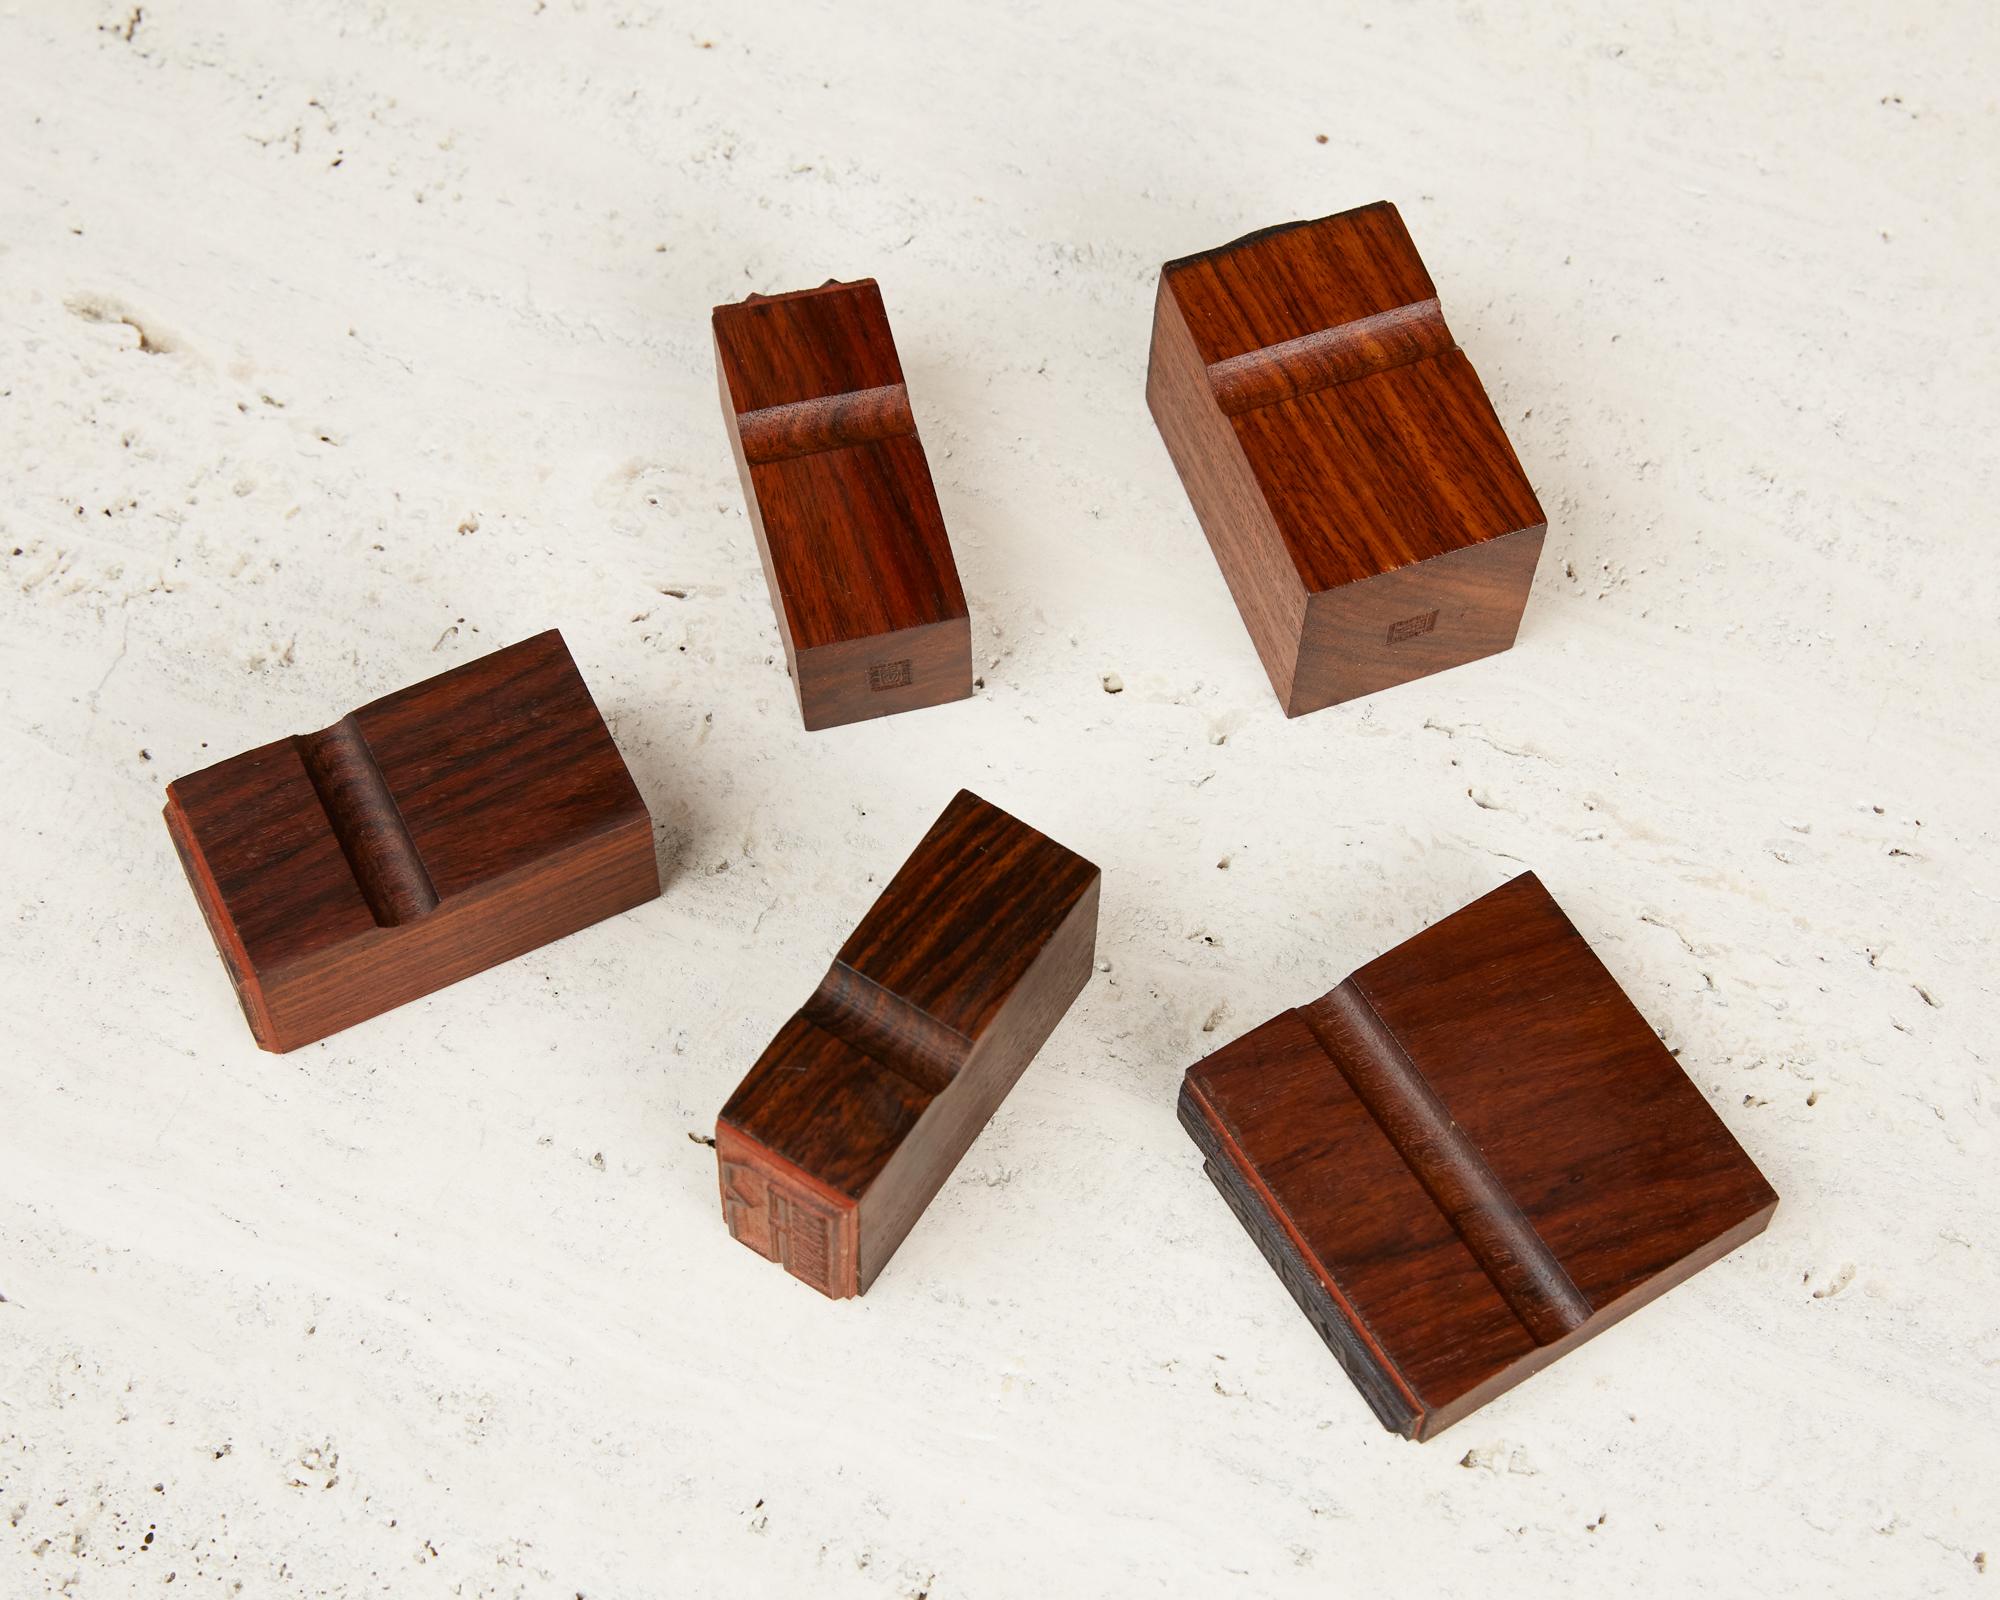 Set of five rosewood and rubber mail stamps by Bruno Munari for Danese, Italy, c.1960s. Bruno Munari was an Italian graphic artist and industrial designer who created a large collection of office products and lighting for Danese and other Italian